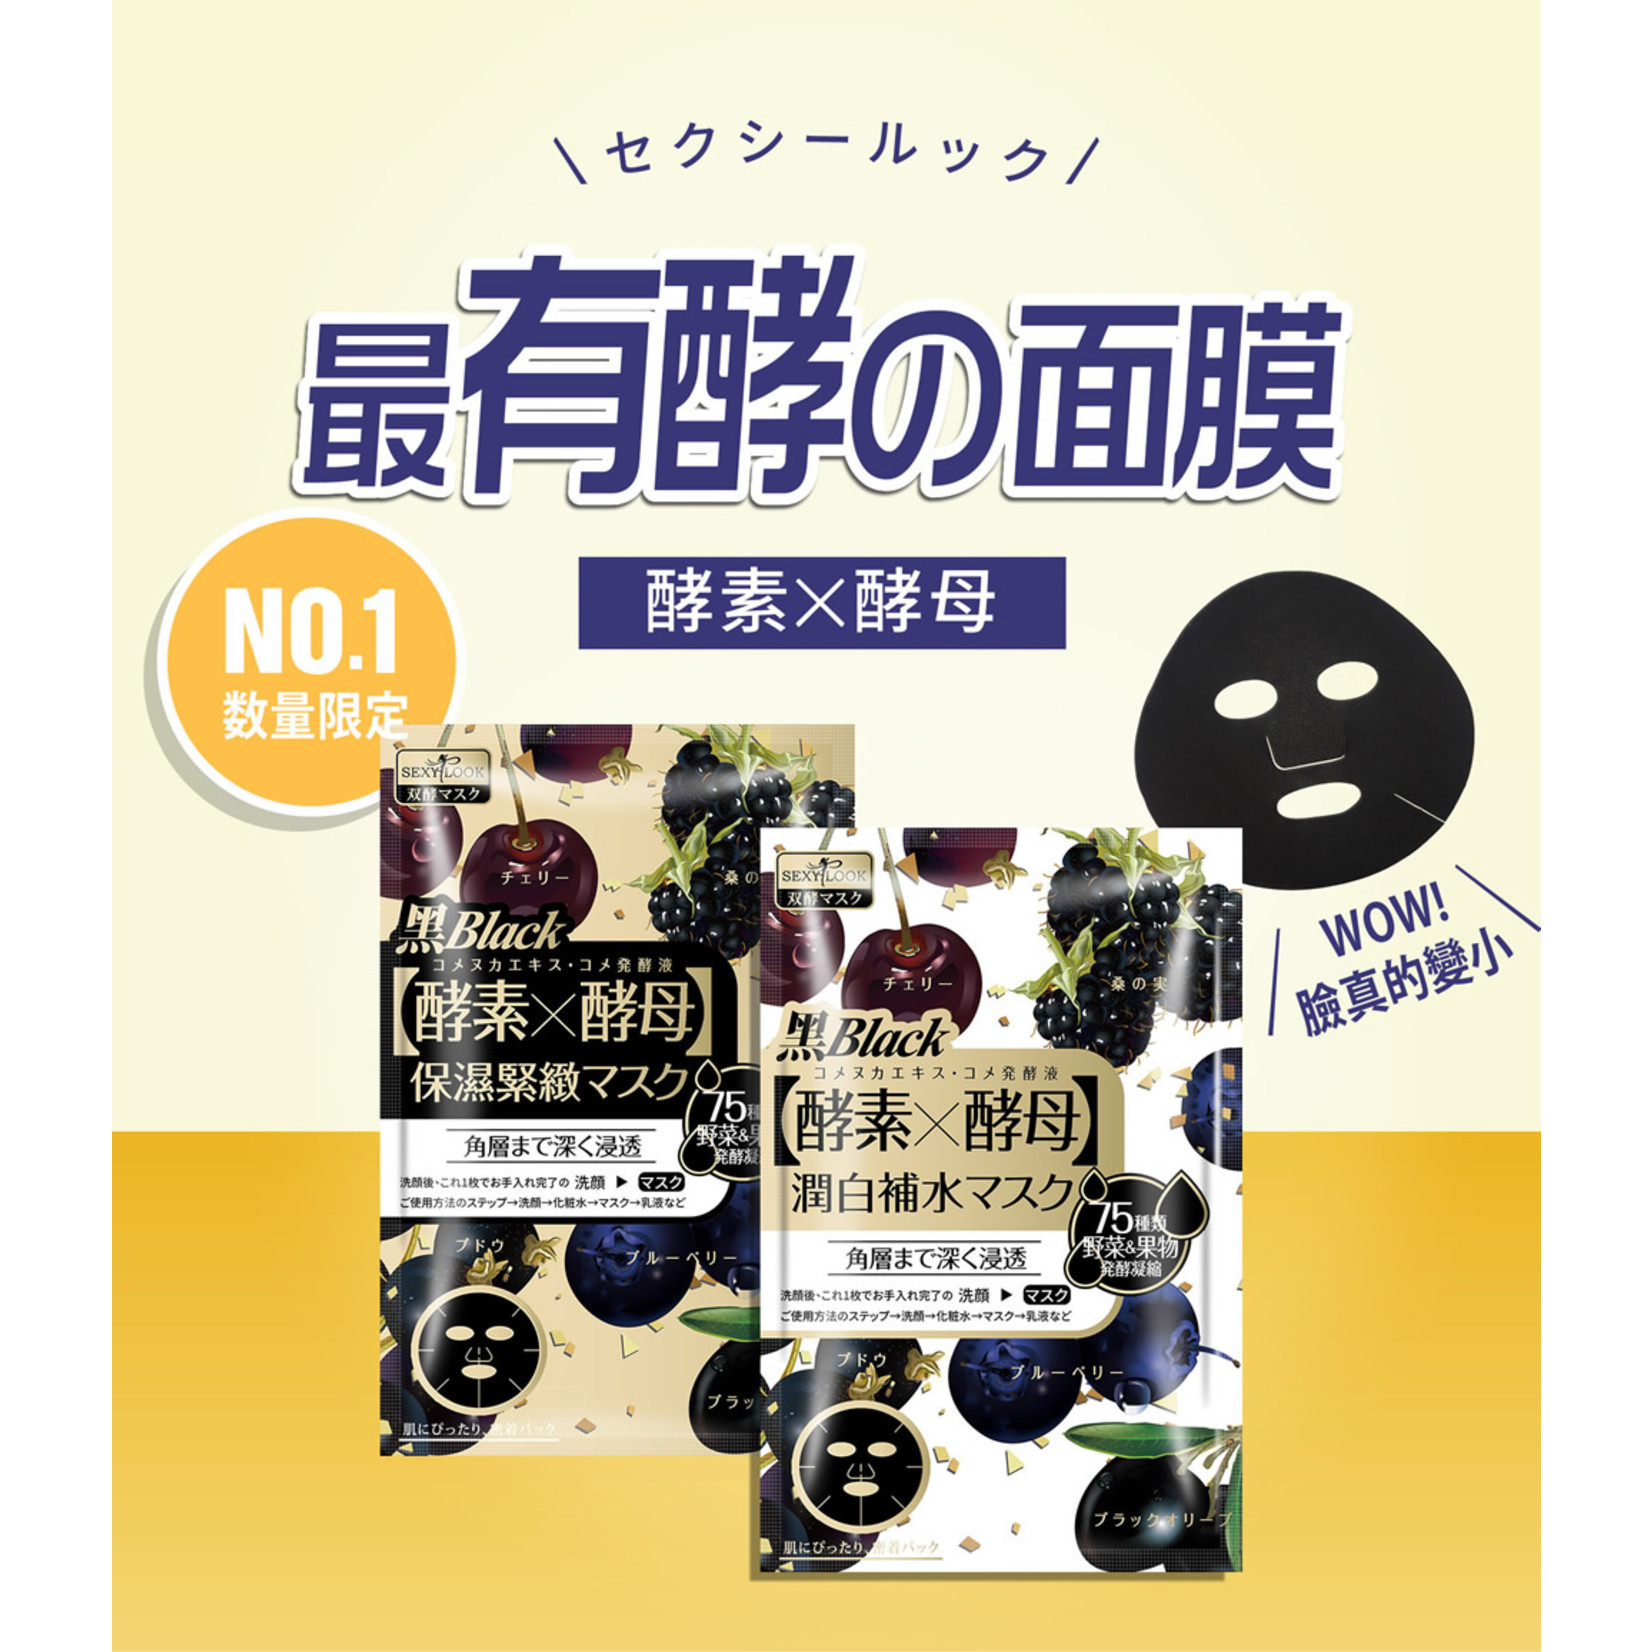 SEXYLOOK Enzyme X Yeast Facial Mask Probierset (5 Stk)